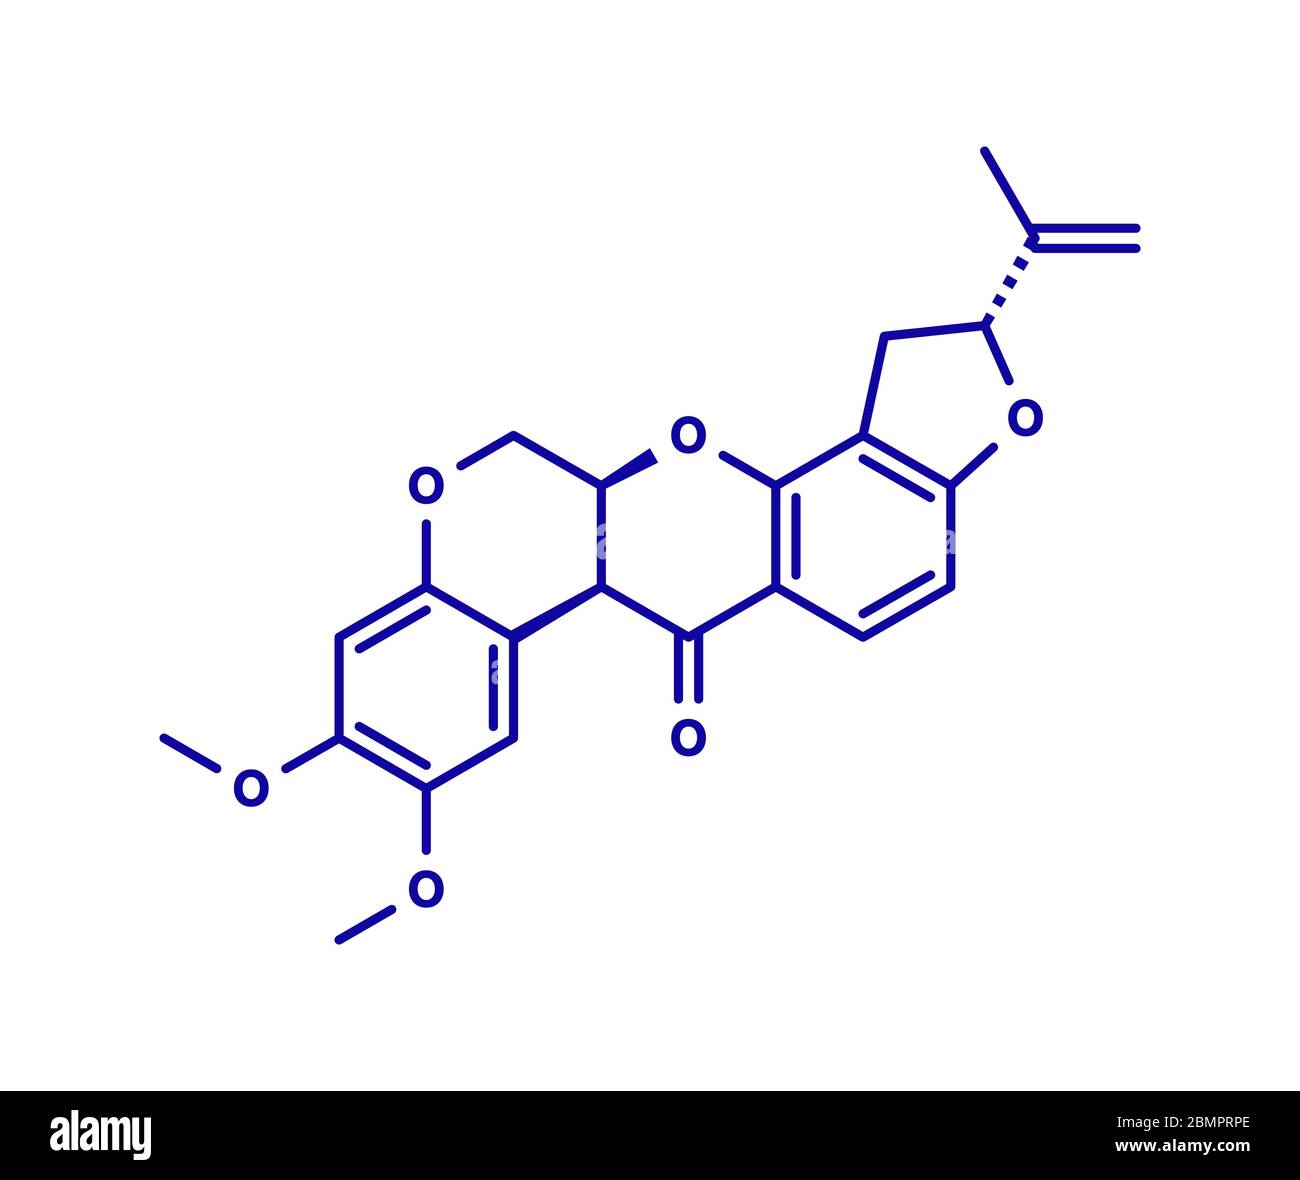 Rotenone broad-spectrum insecticide molecule. Also linked to development of Parkinson's disease. Skeletal formula. Stock Photo